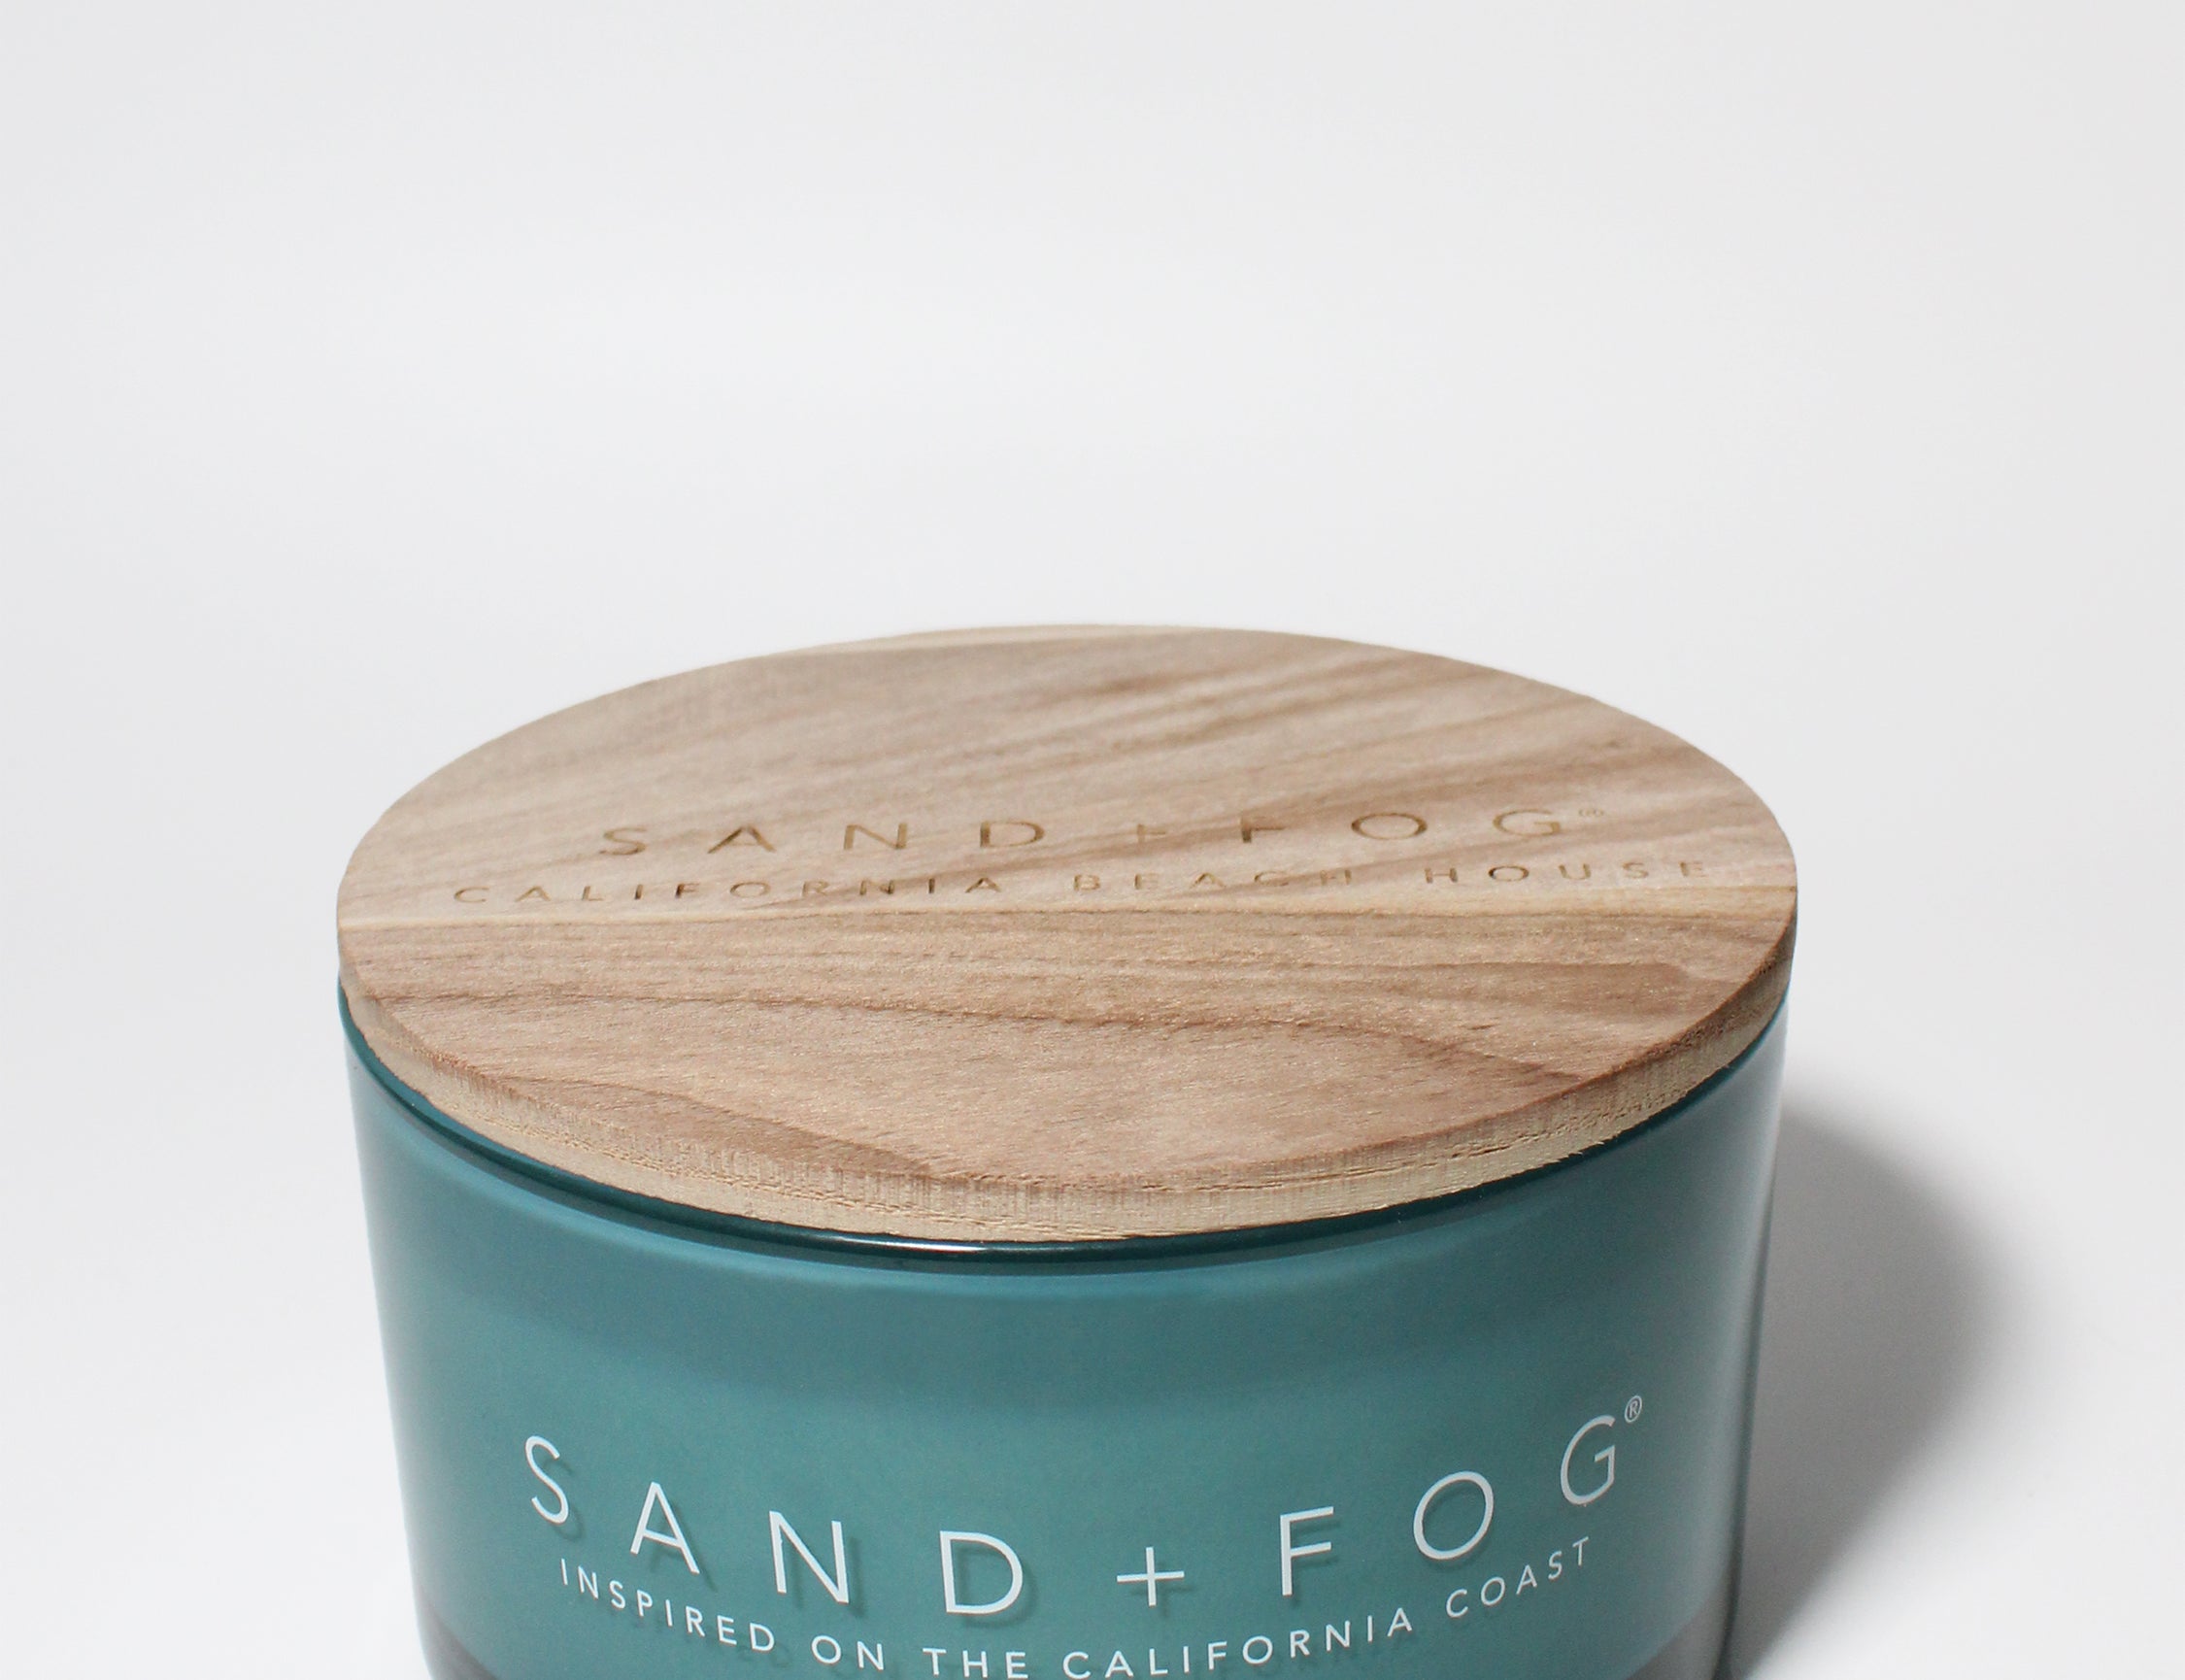 California Beach House 23 oz scented candle Seawater vessel with Sand+Fog wood lid